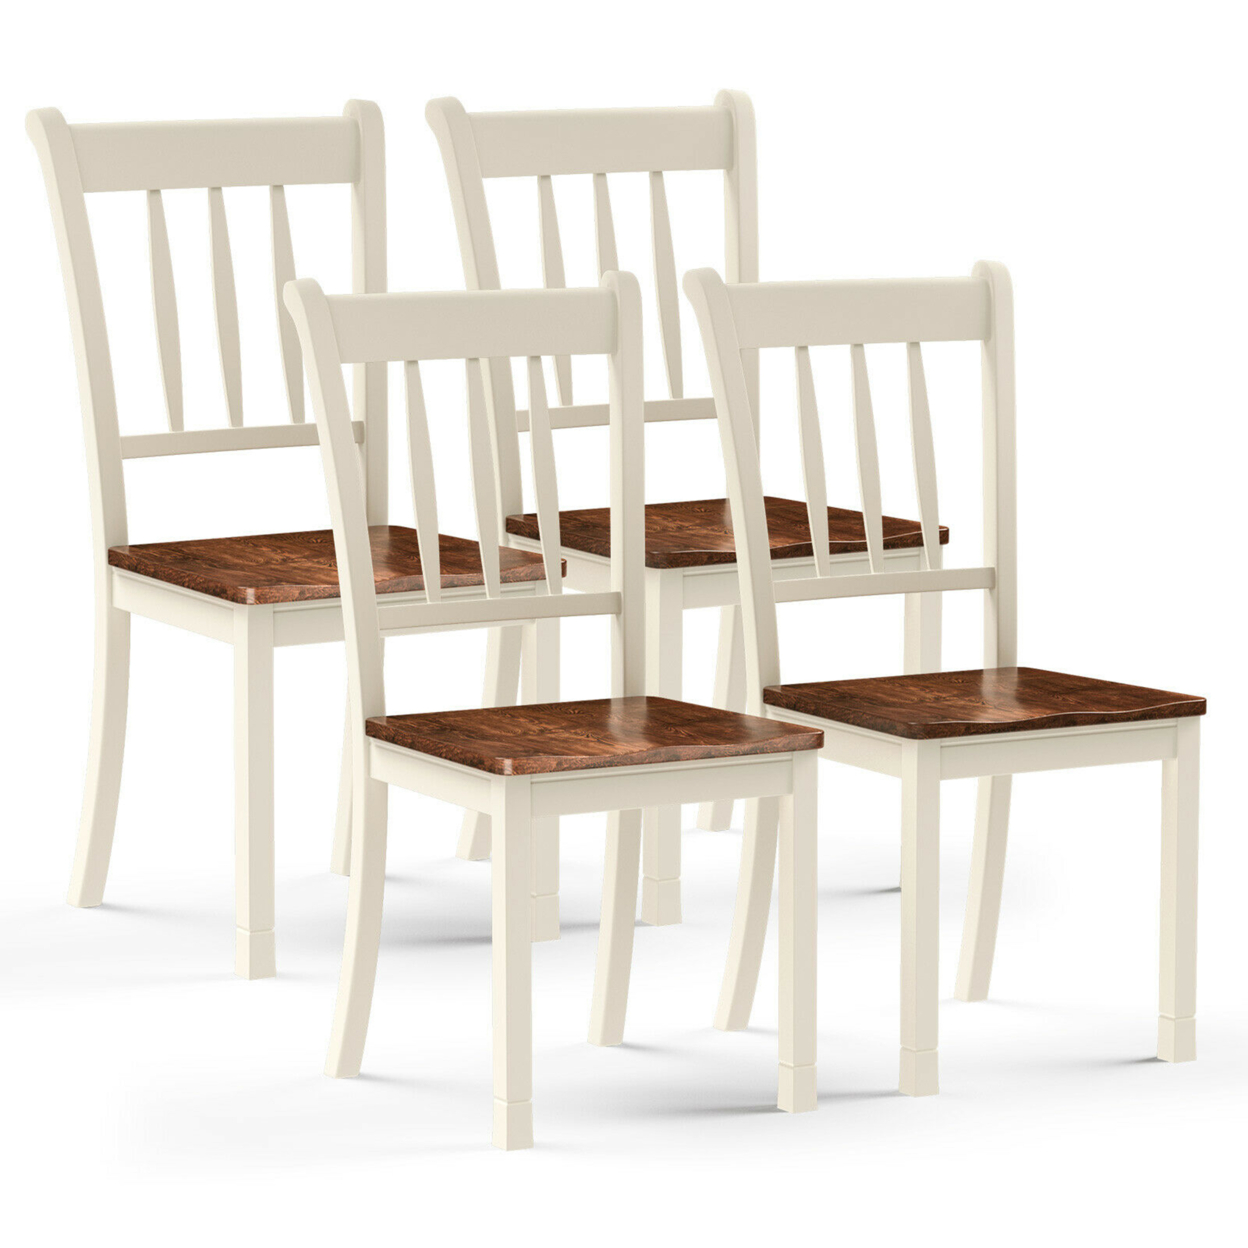 4PCS Wooden Dining Side Chair High Back Armless Home Furniture White